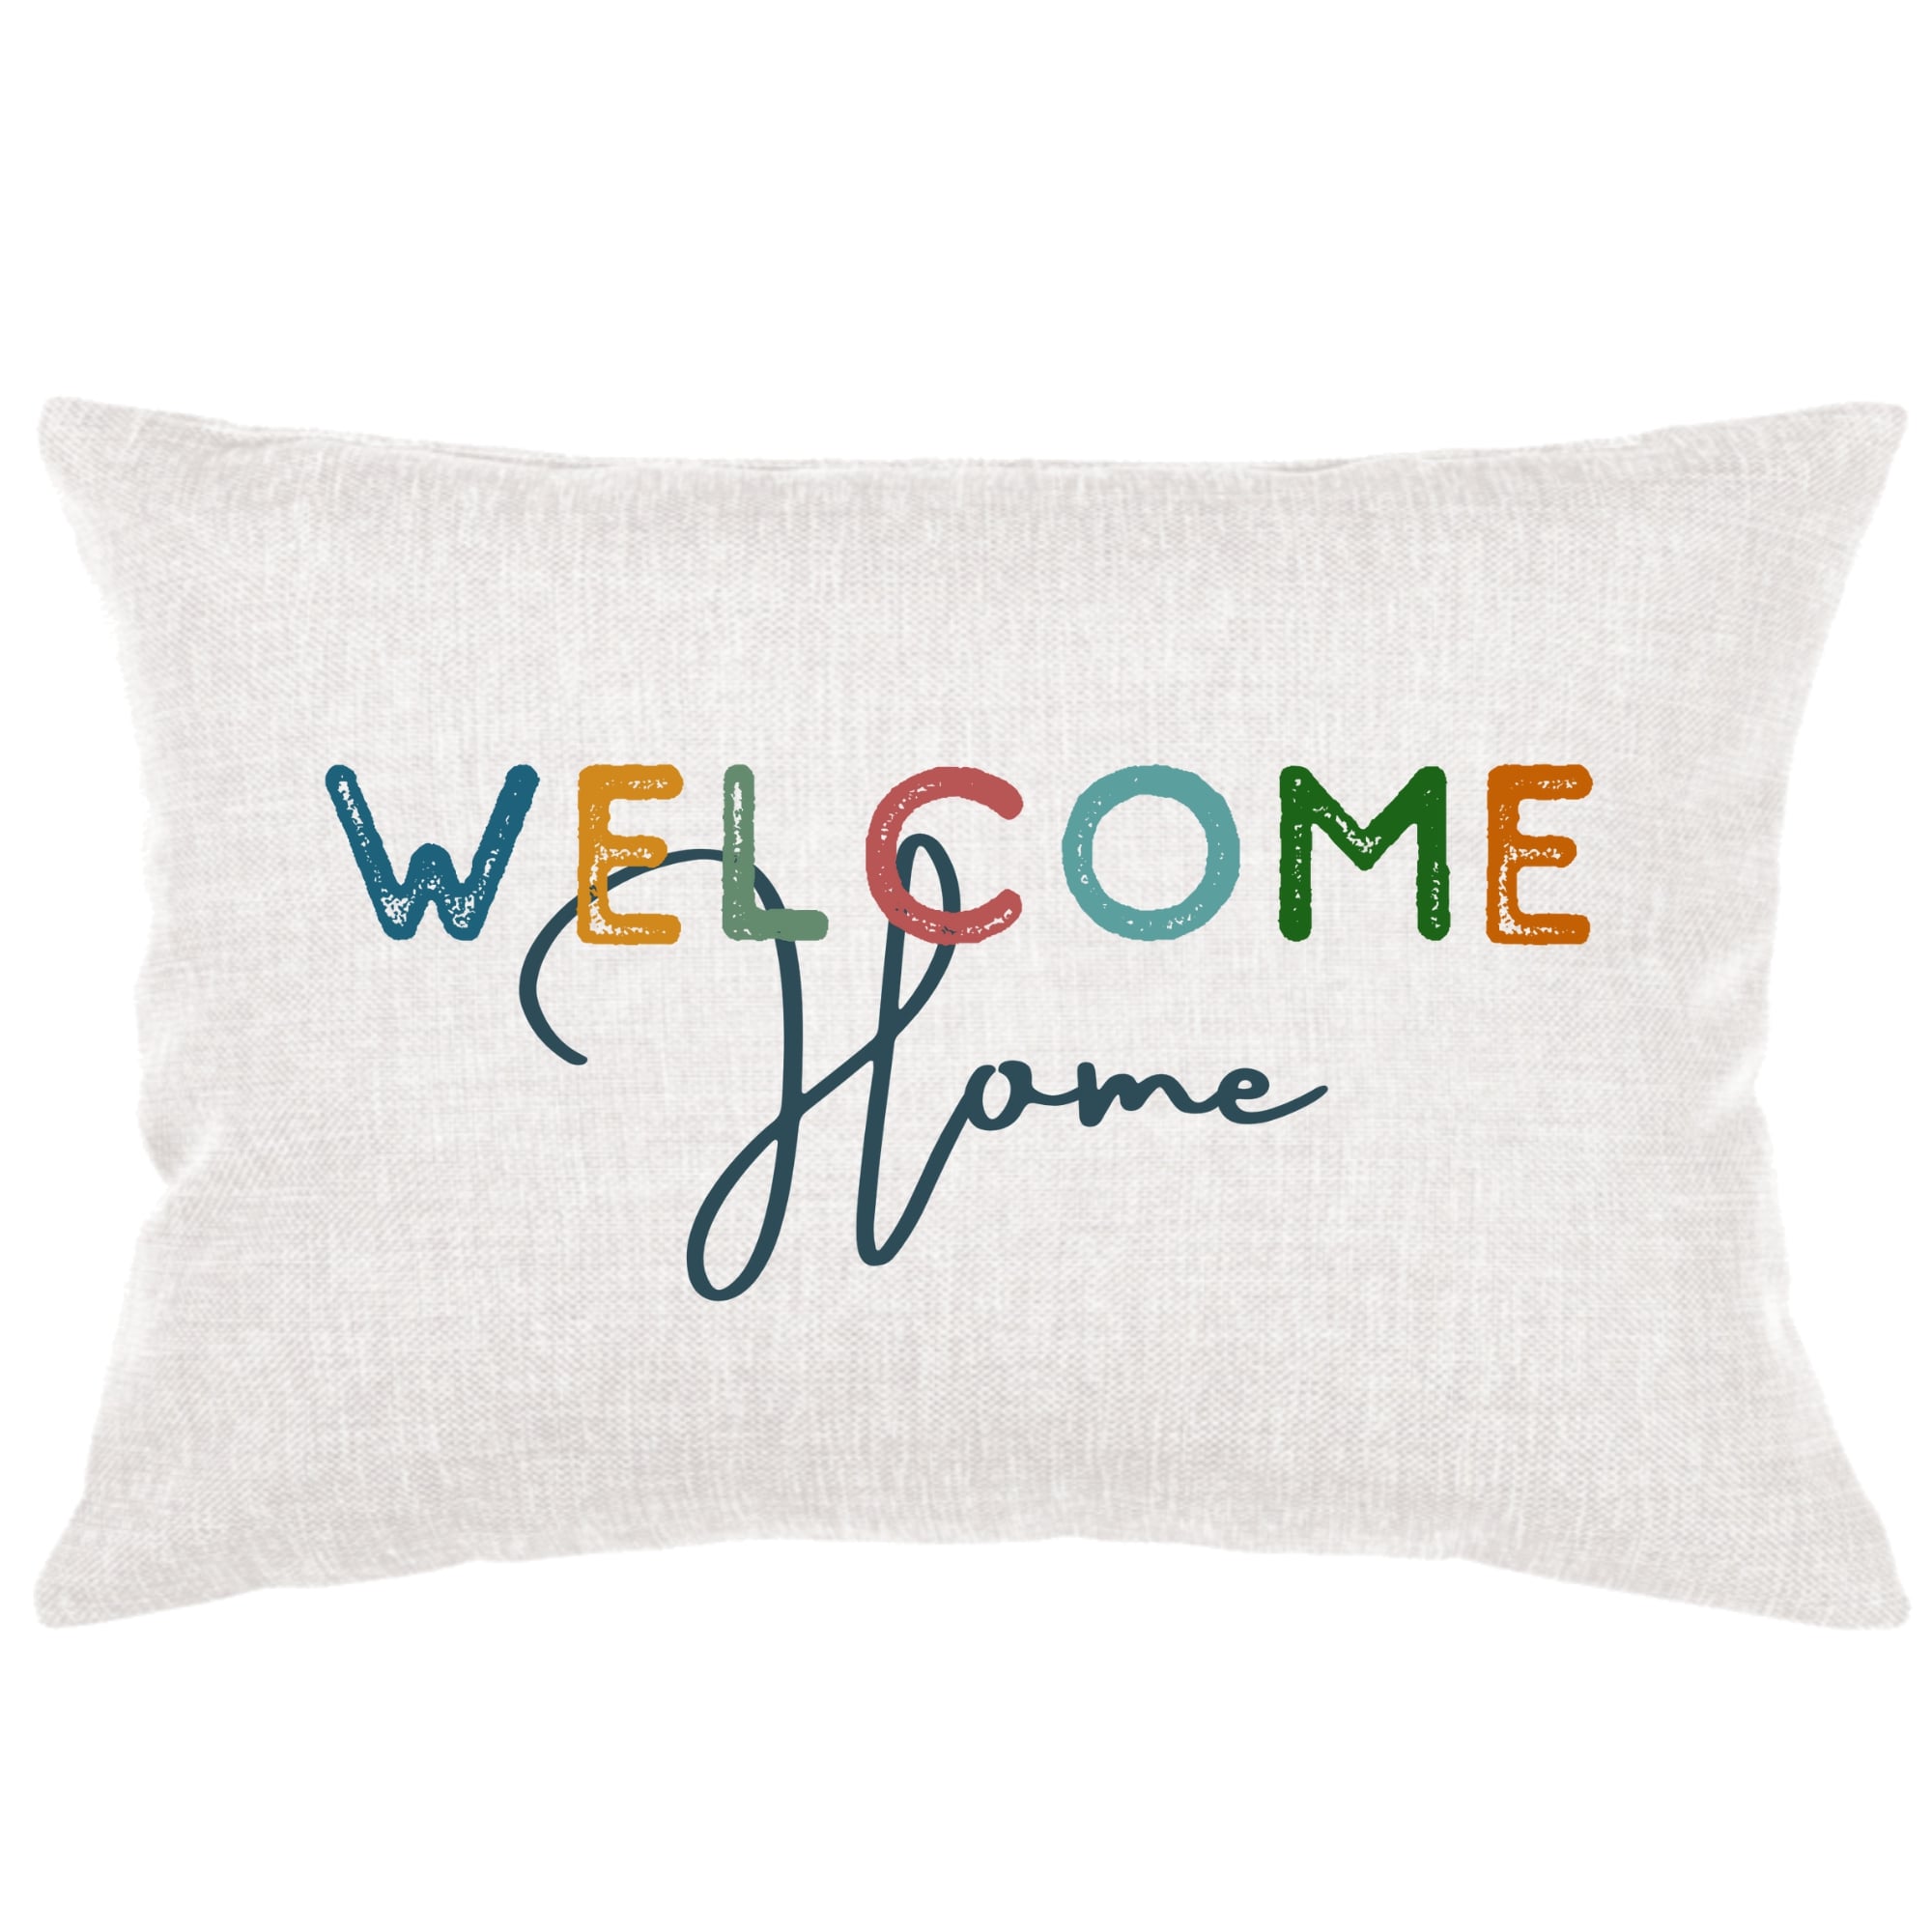 Welcome Home Lumbar Pillow Throw/Decorative Pillow - Southern Sisters